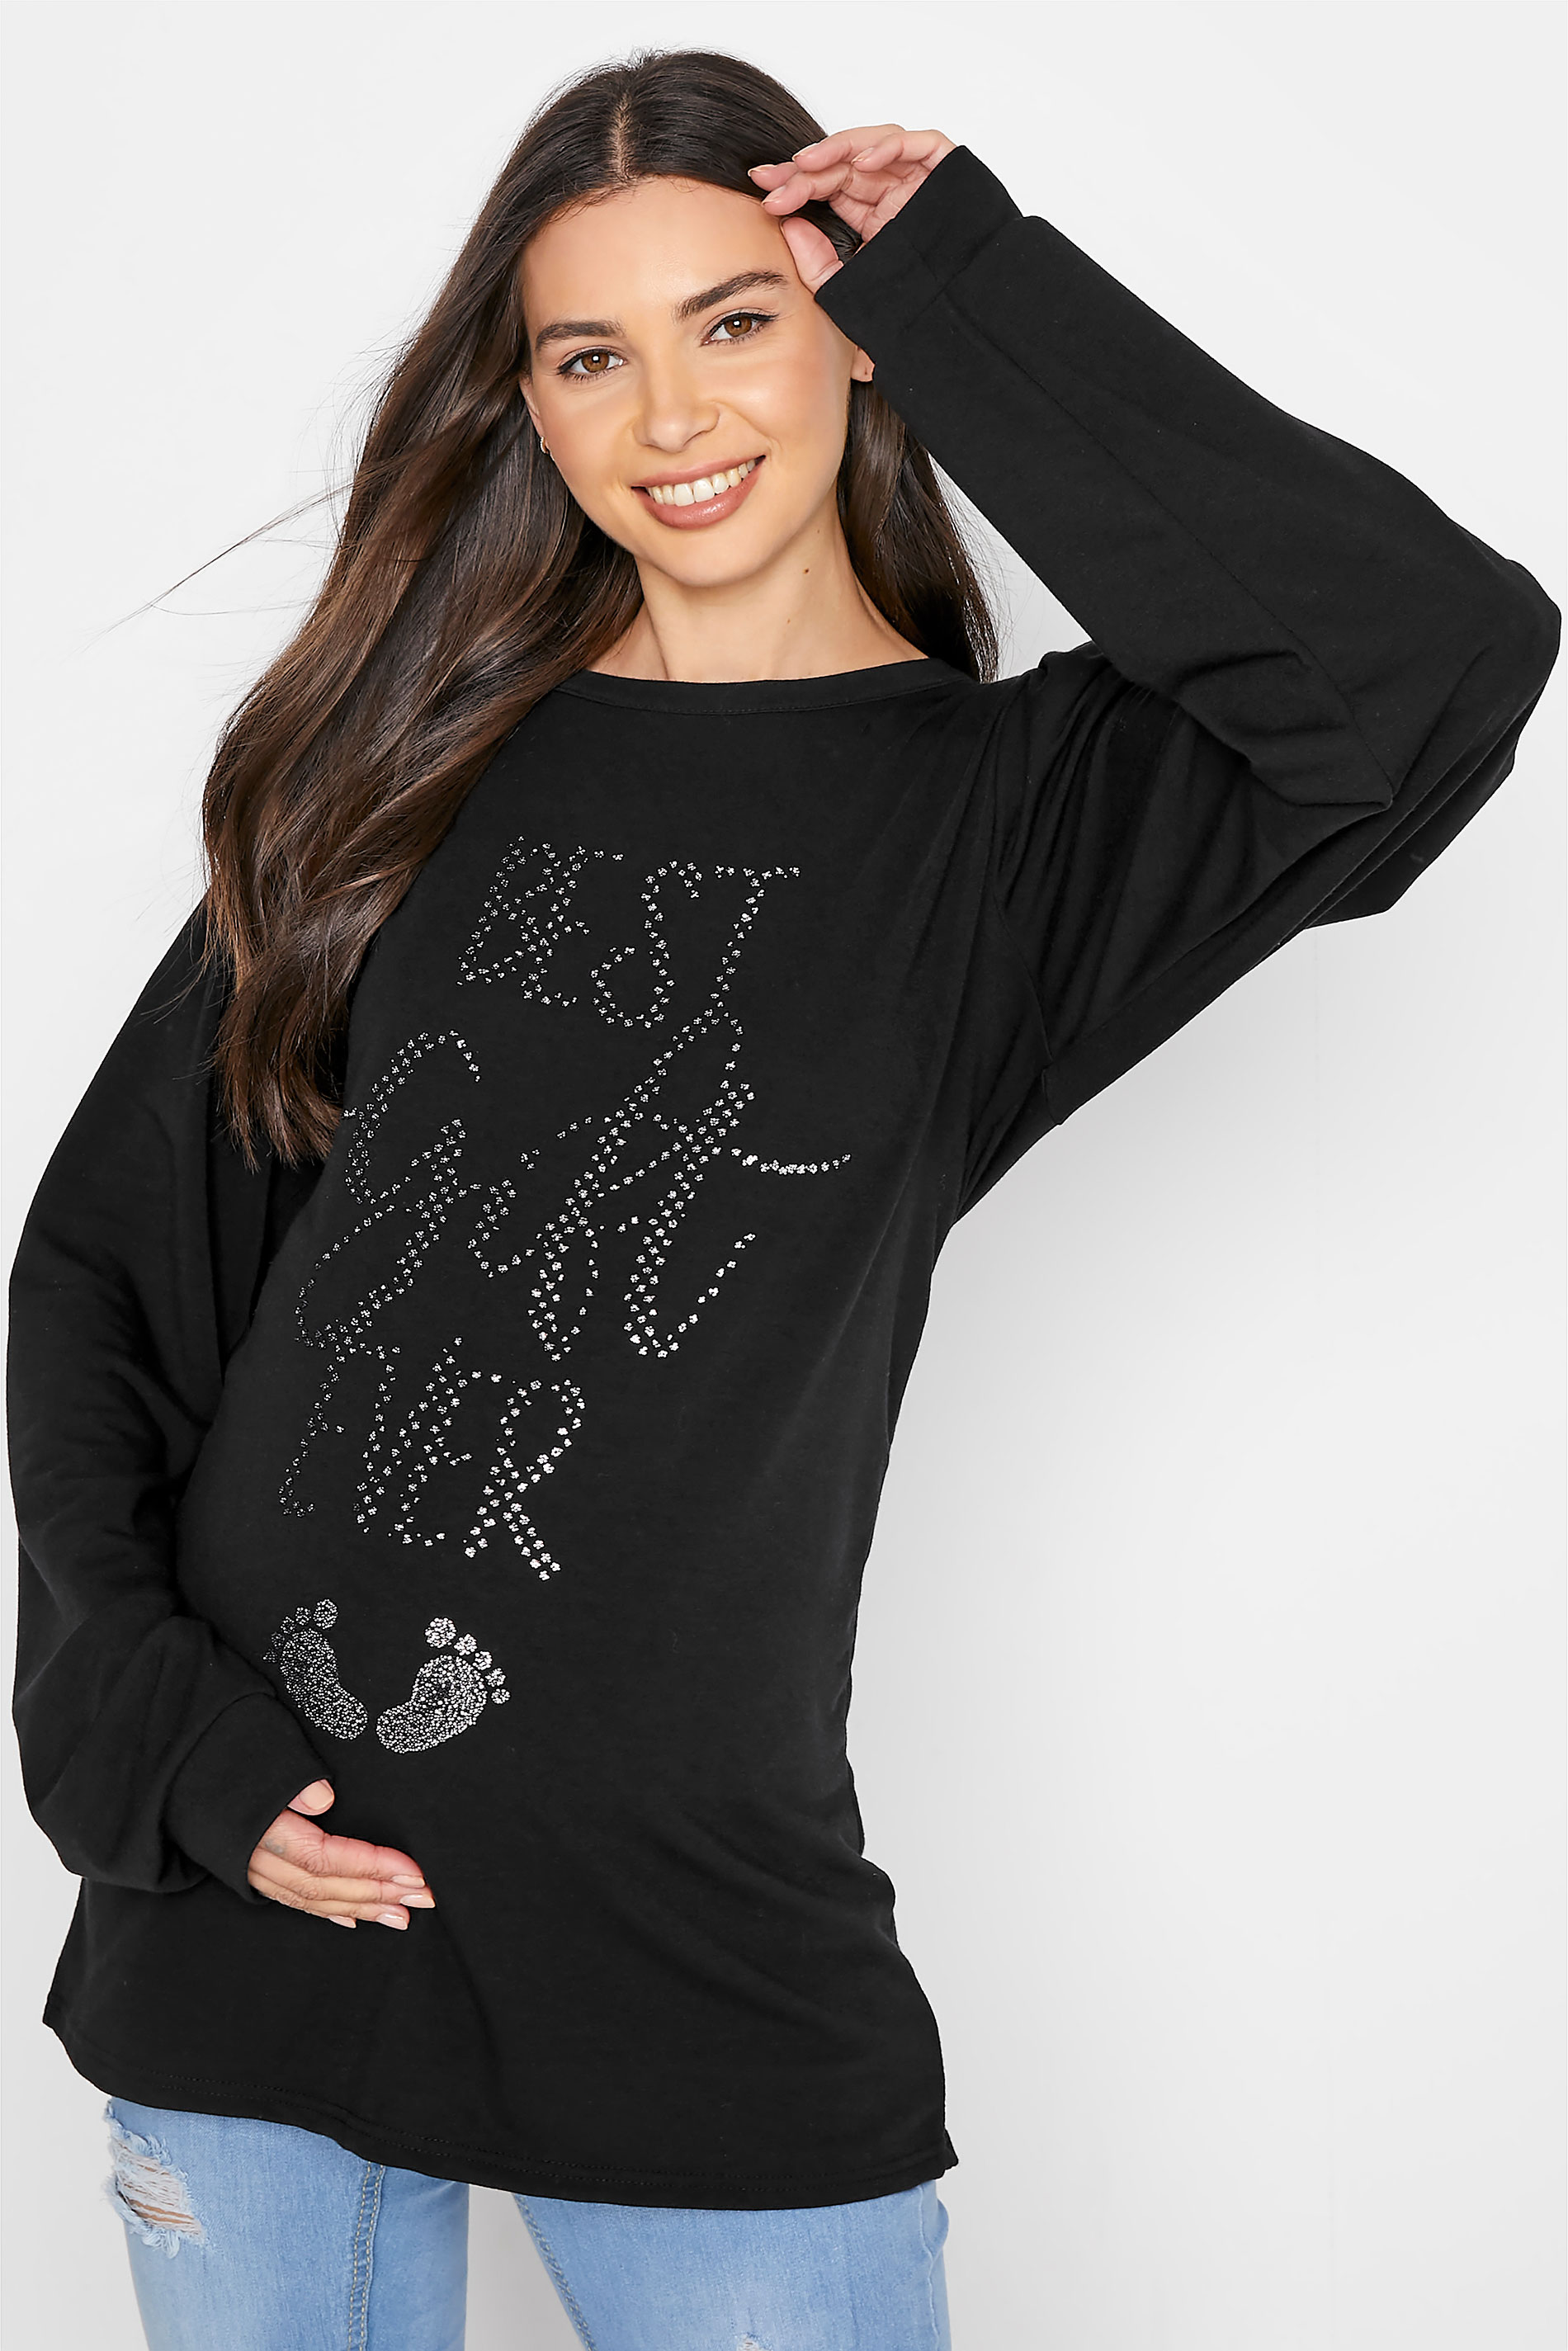 LTS Tall Maternity Black 'Best Gift Ever' Embellished Slogan Christmas Top 1